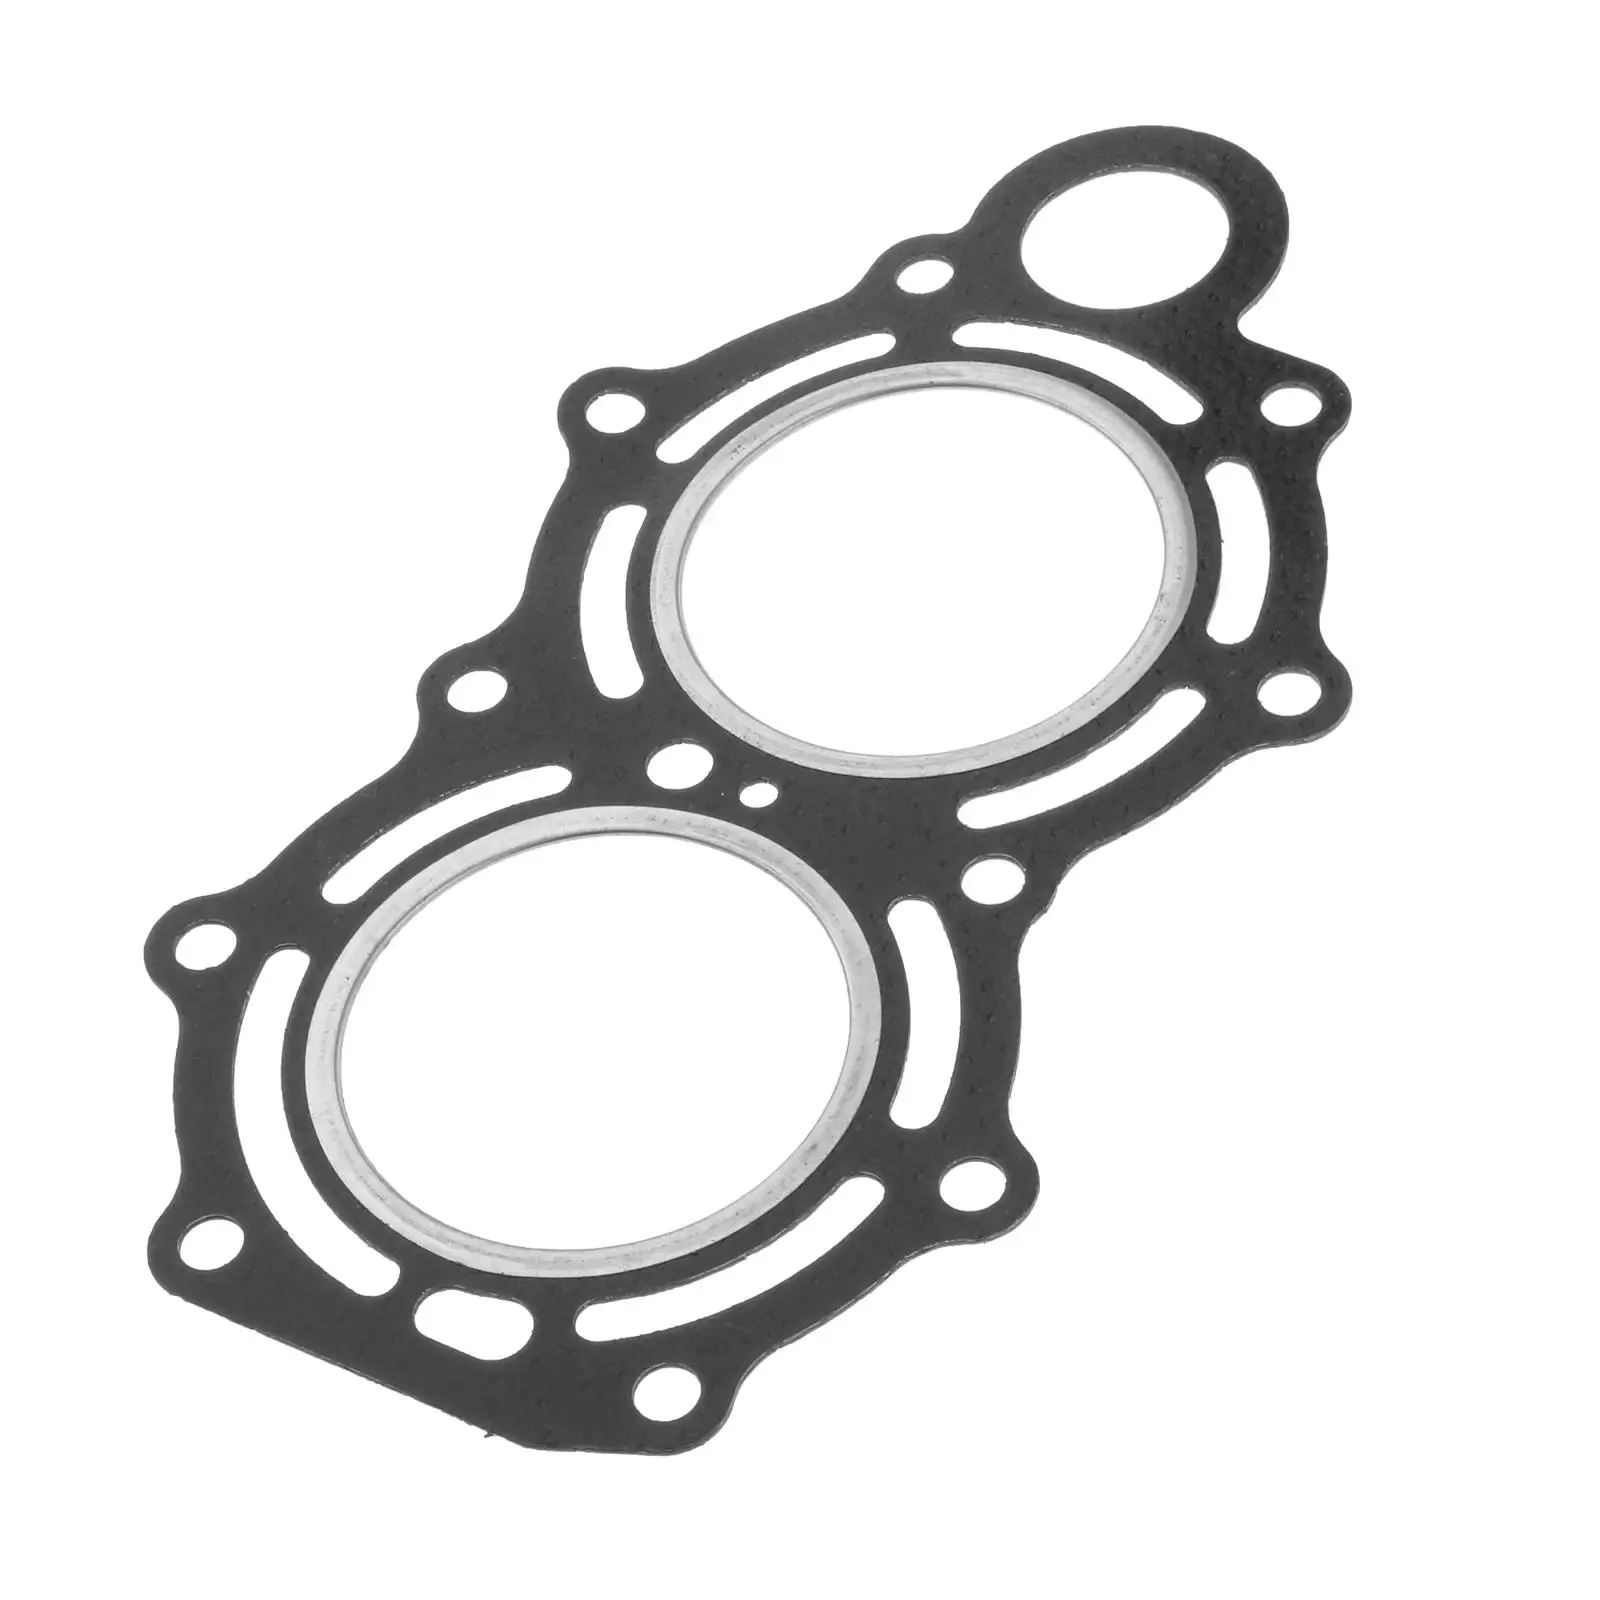 Boat Cylinder Head Gasket No. 3B2-01005 for Tohatsu 2T 6.8HP-9.8HP Outboard Motor Accessories